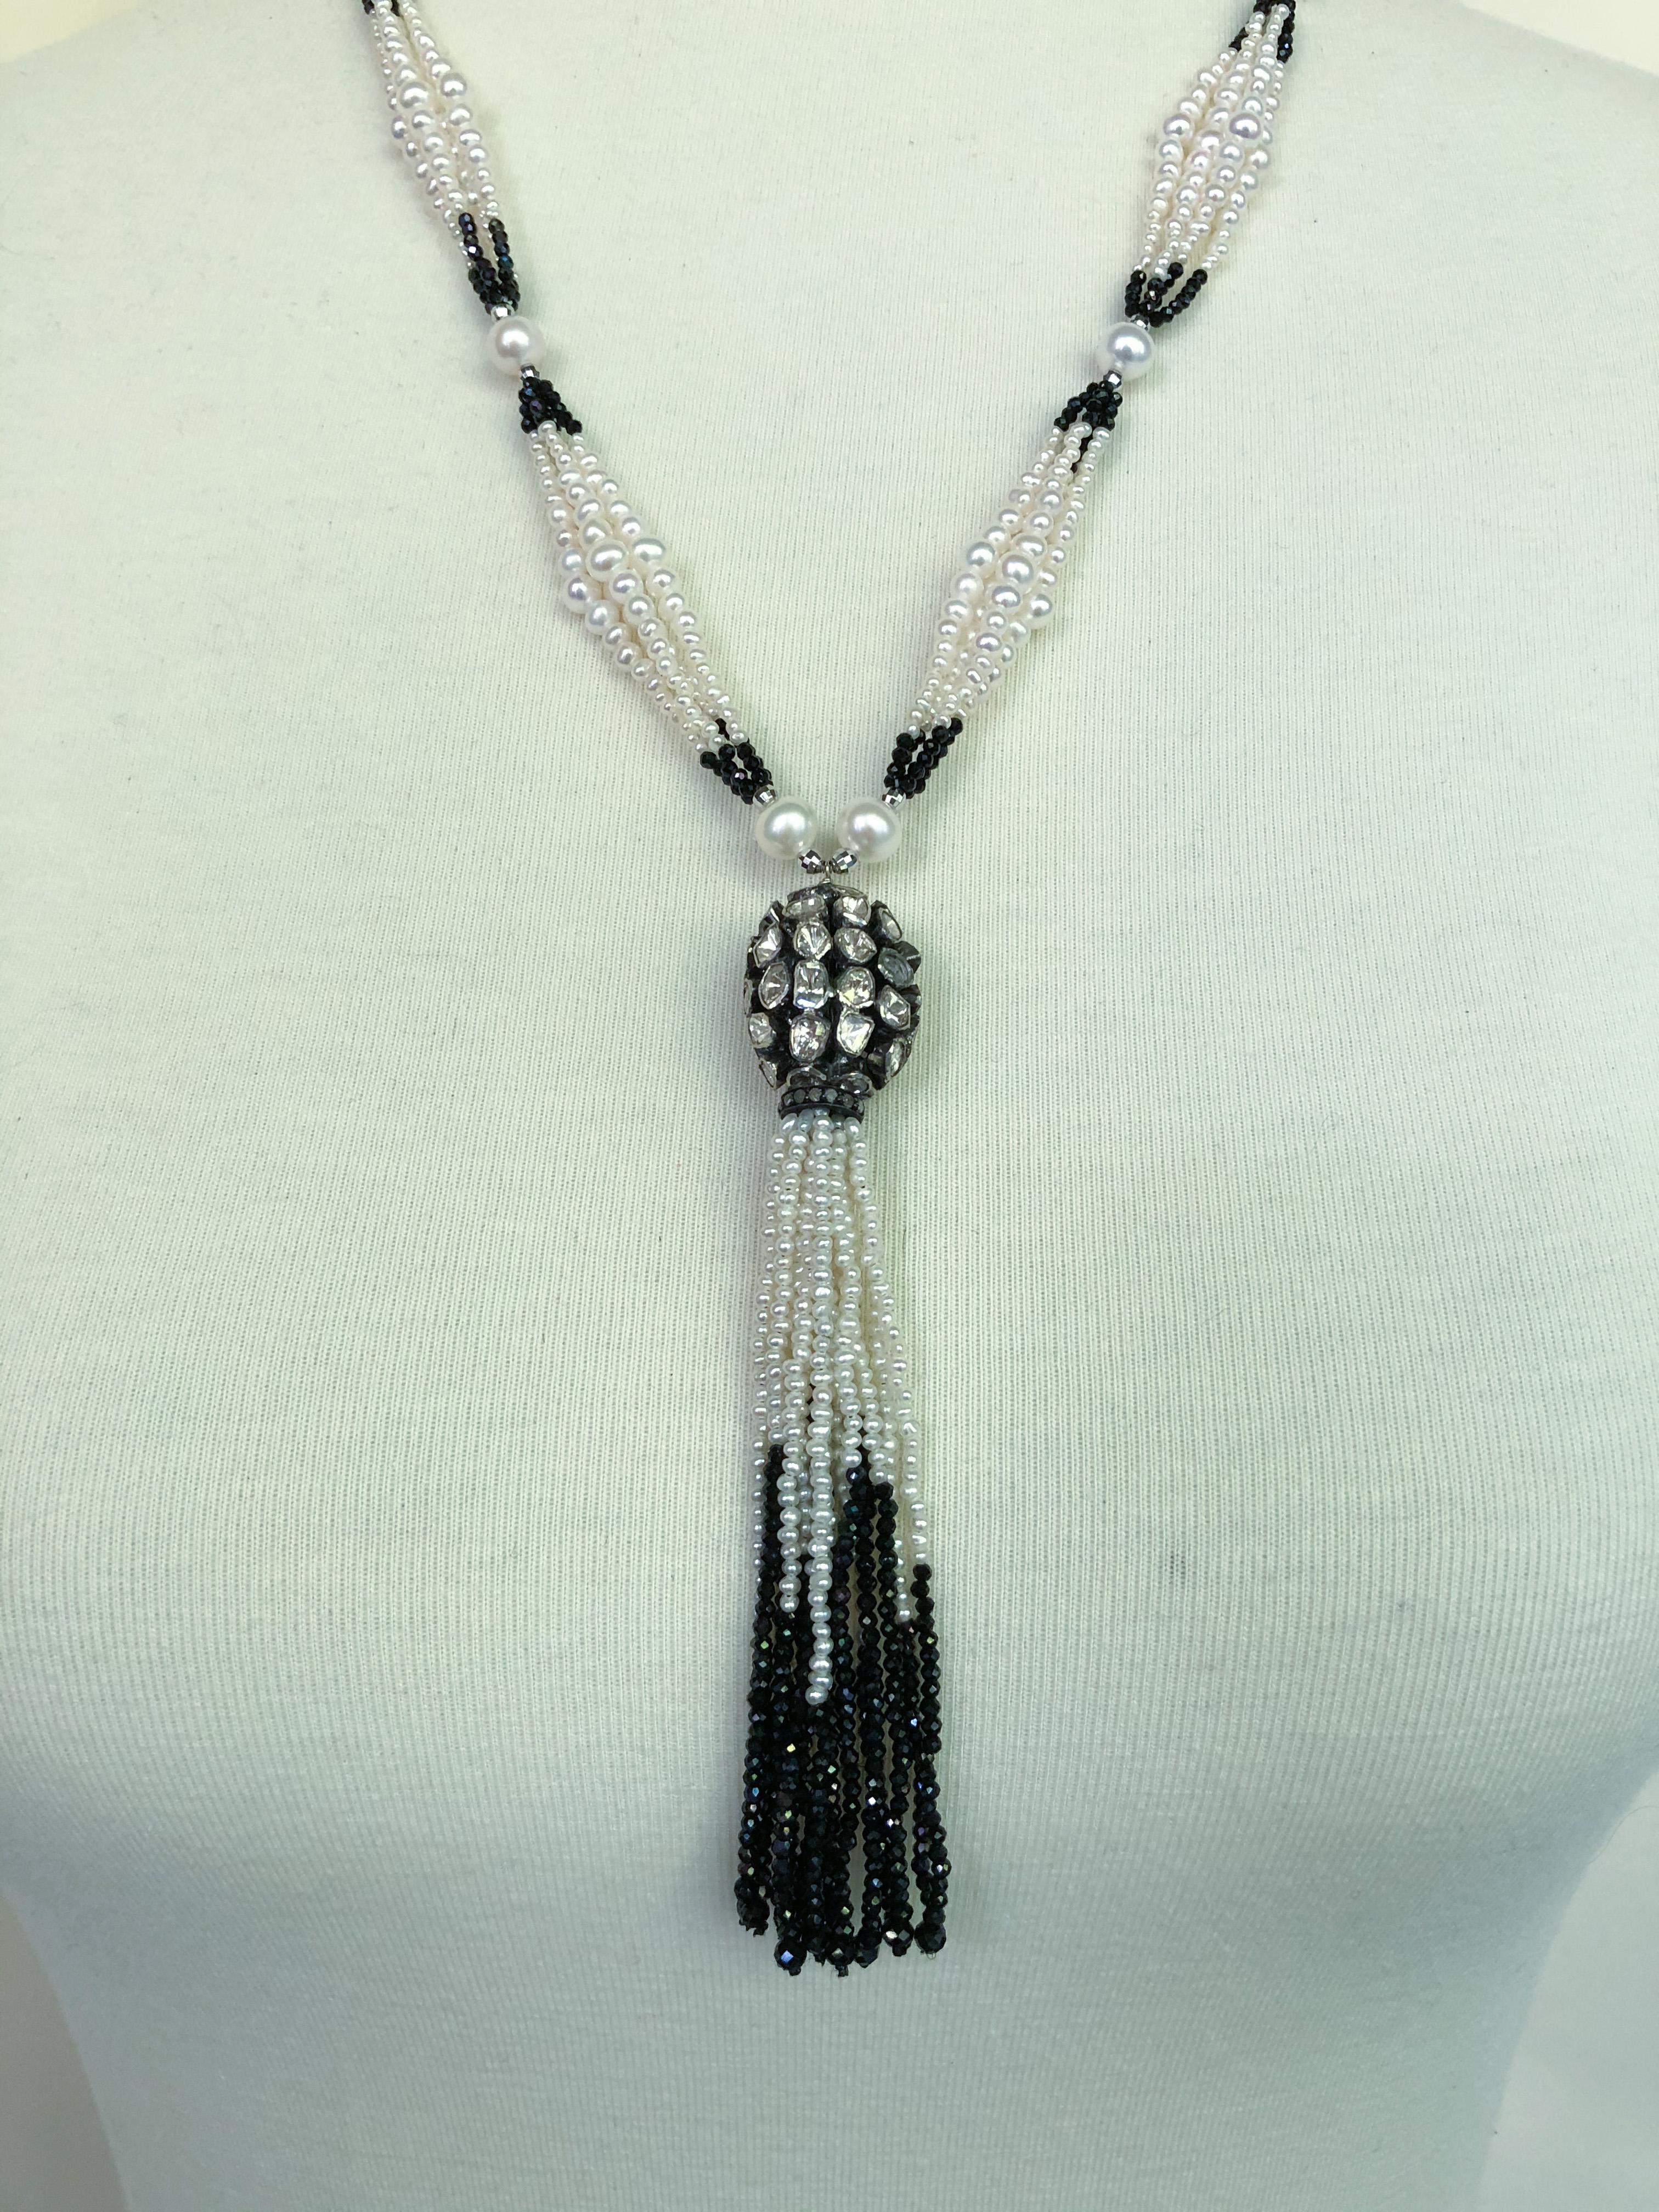 This stunning necklace is made up with multiple strands of double graduated white pearls (1-4 mm) strung between black spinel beads (1 mm), silver rhodium-plated beads (2.5 mm), and a larger white pearl (5-6 mm). The tassel features a large silver